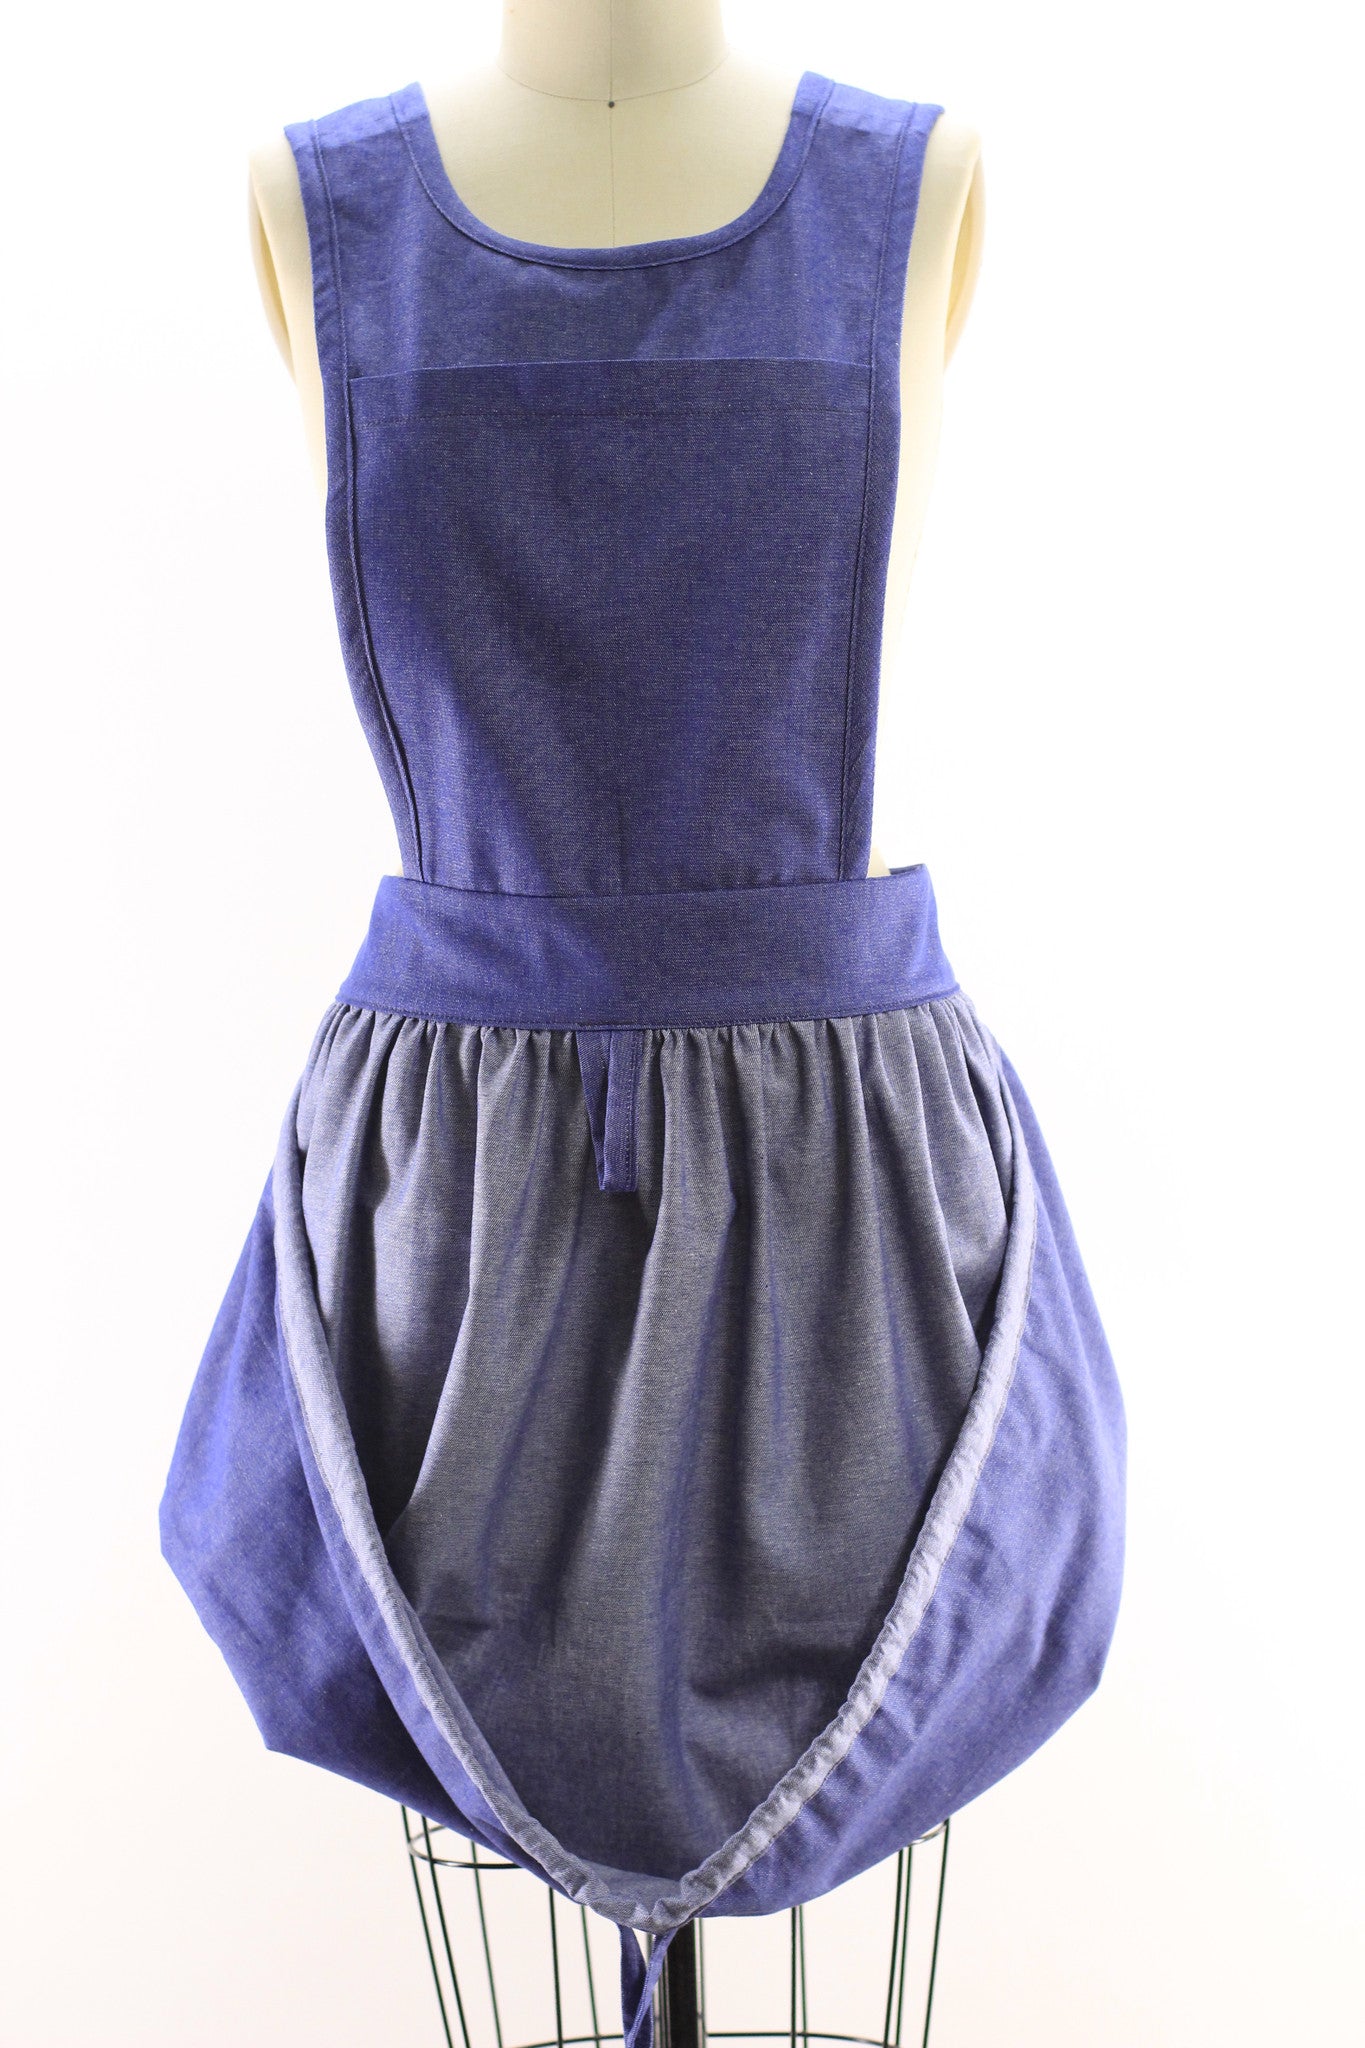 Gathering Apron with Bib Top in Denim, front view, loosened